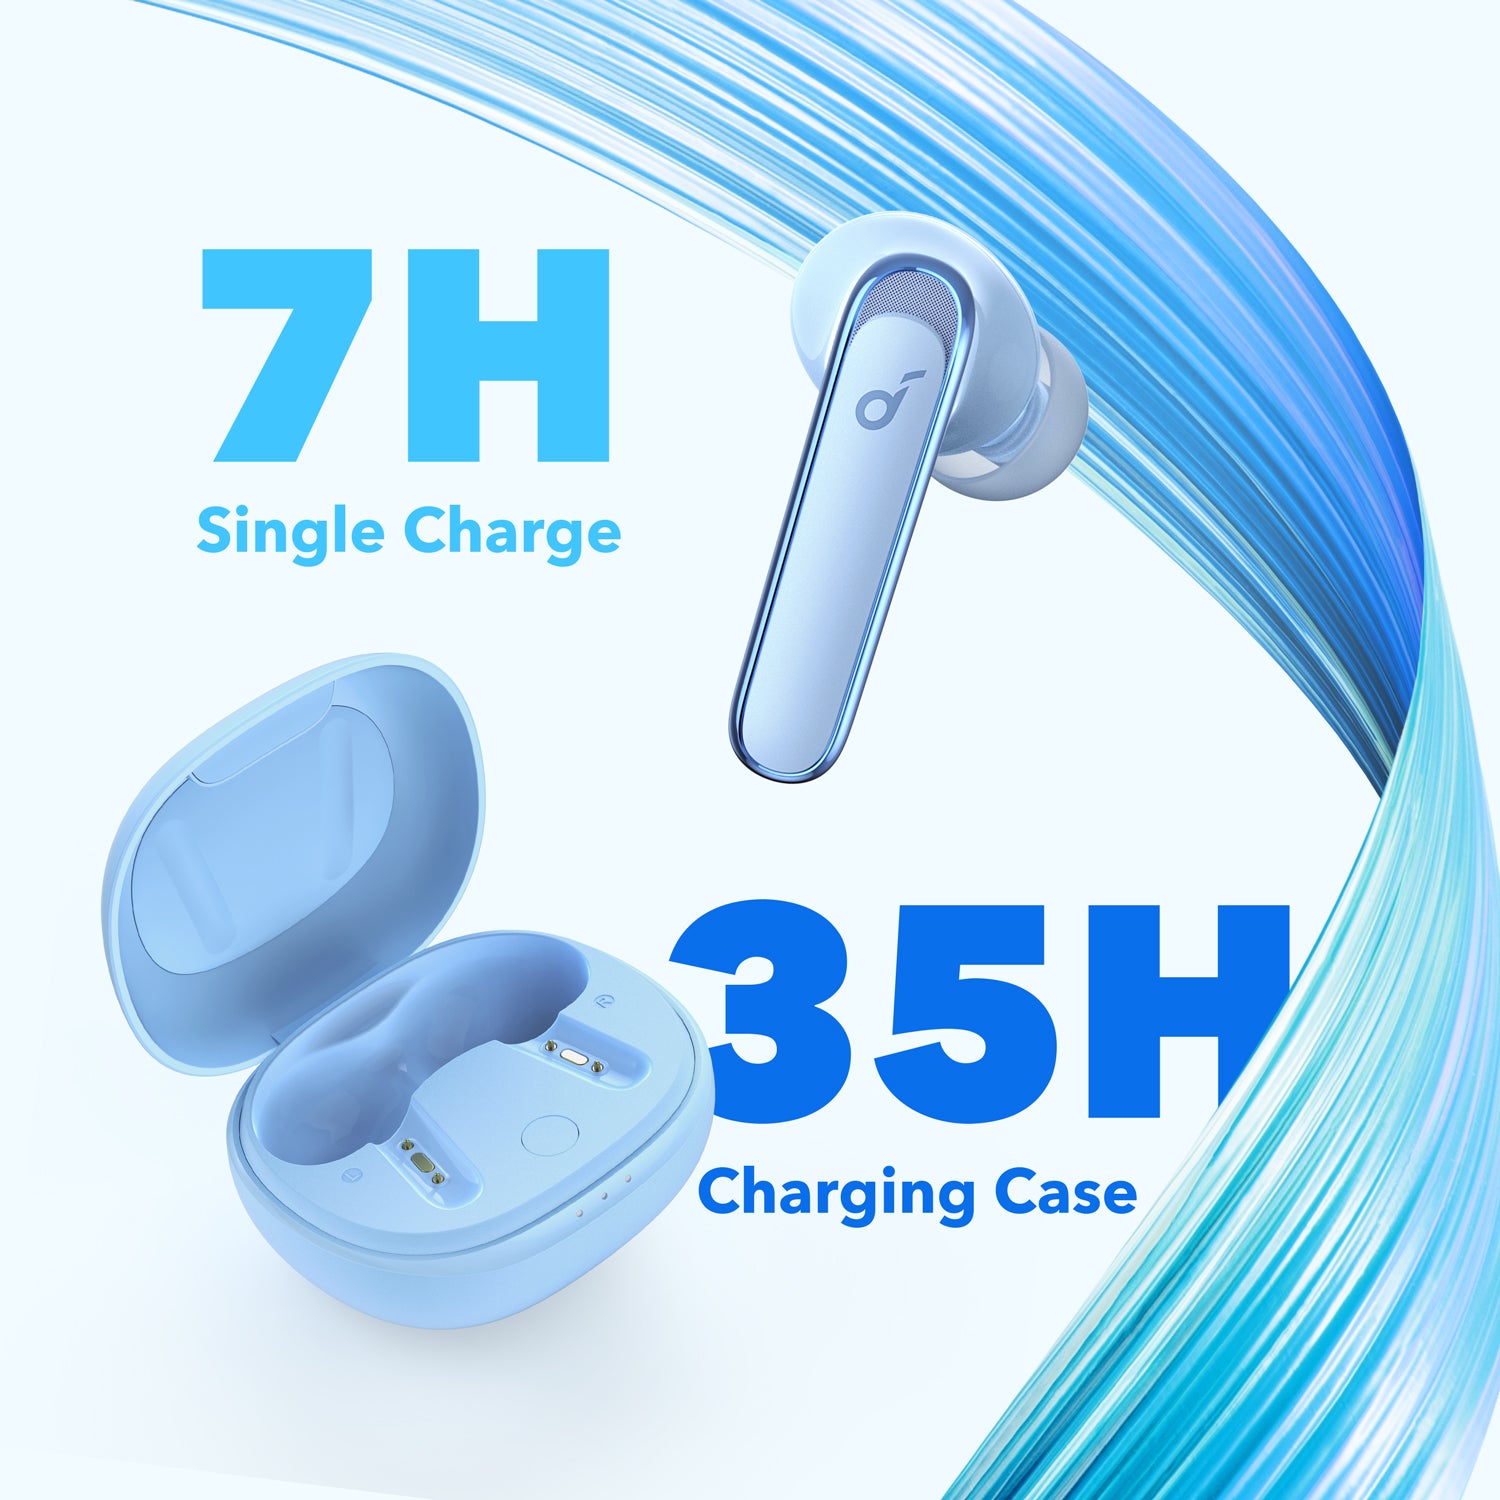 Anker Soundcore Life P3 Noise Cancelling wireless Earbuds